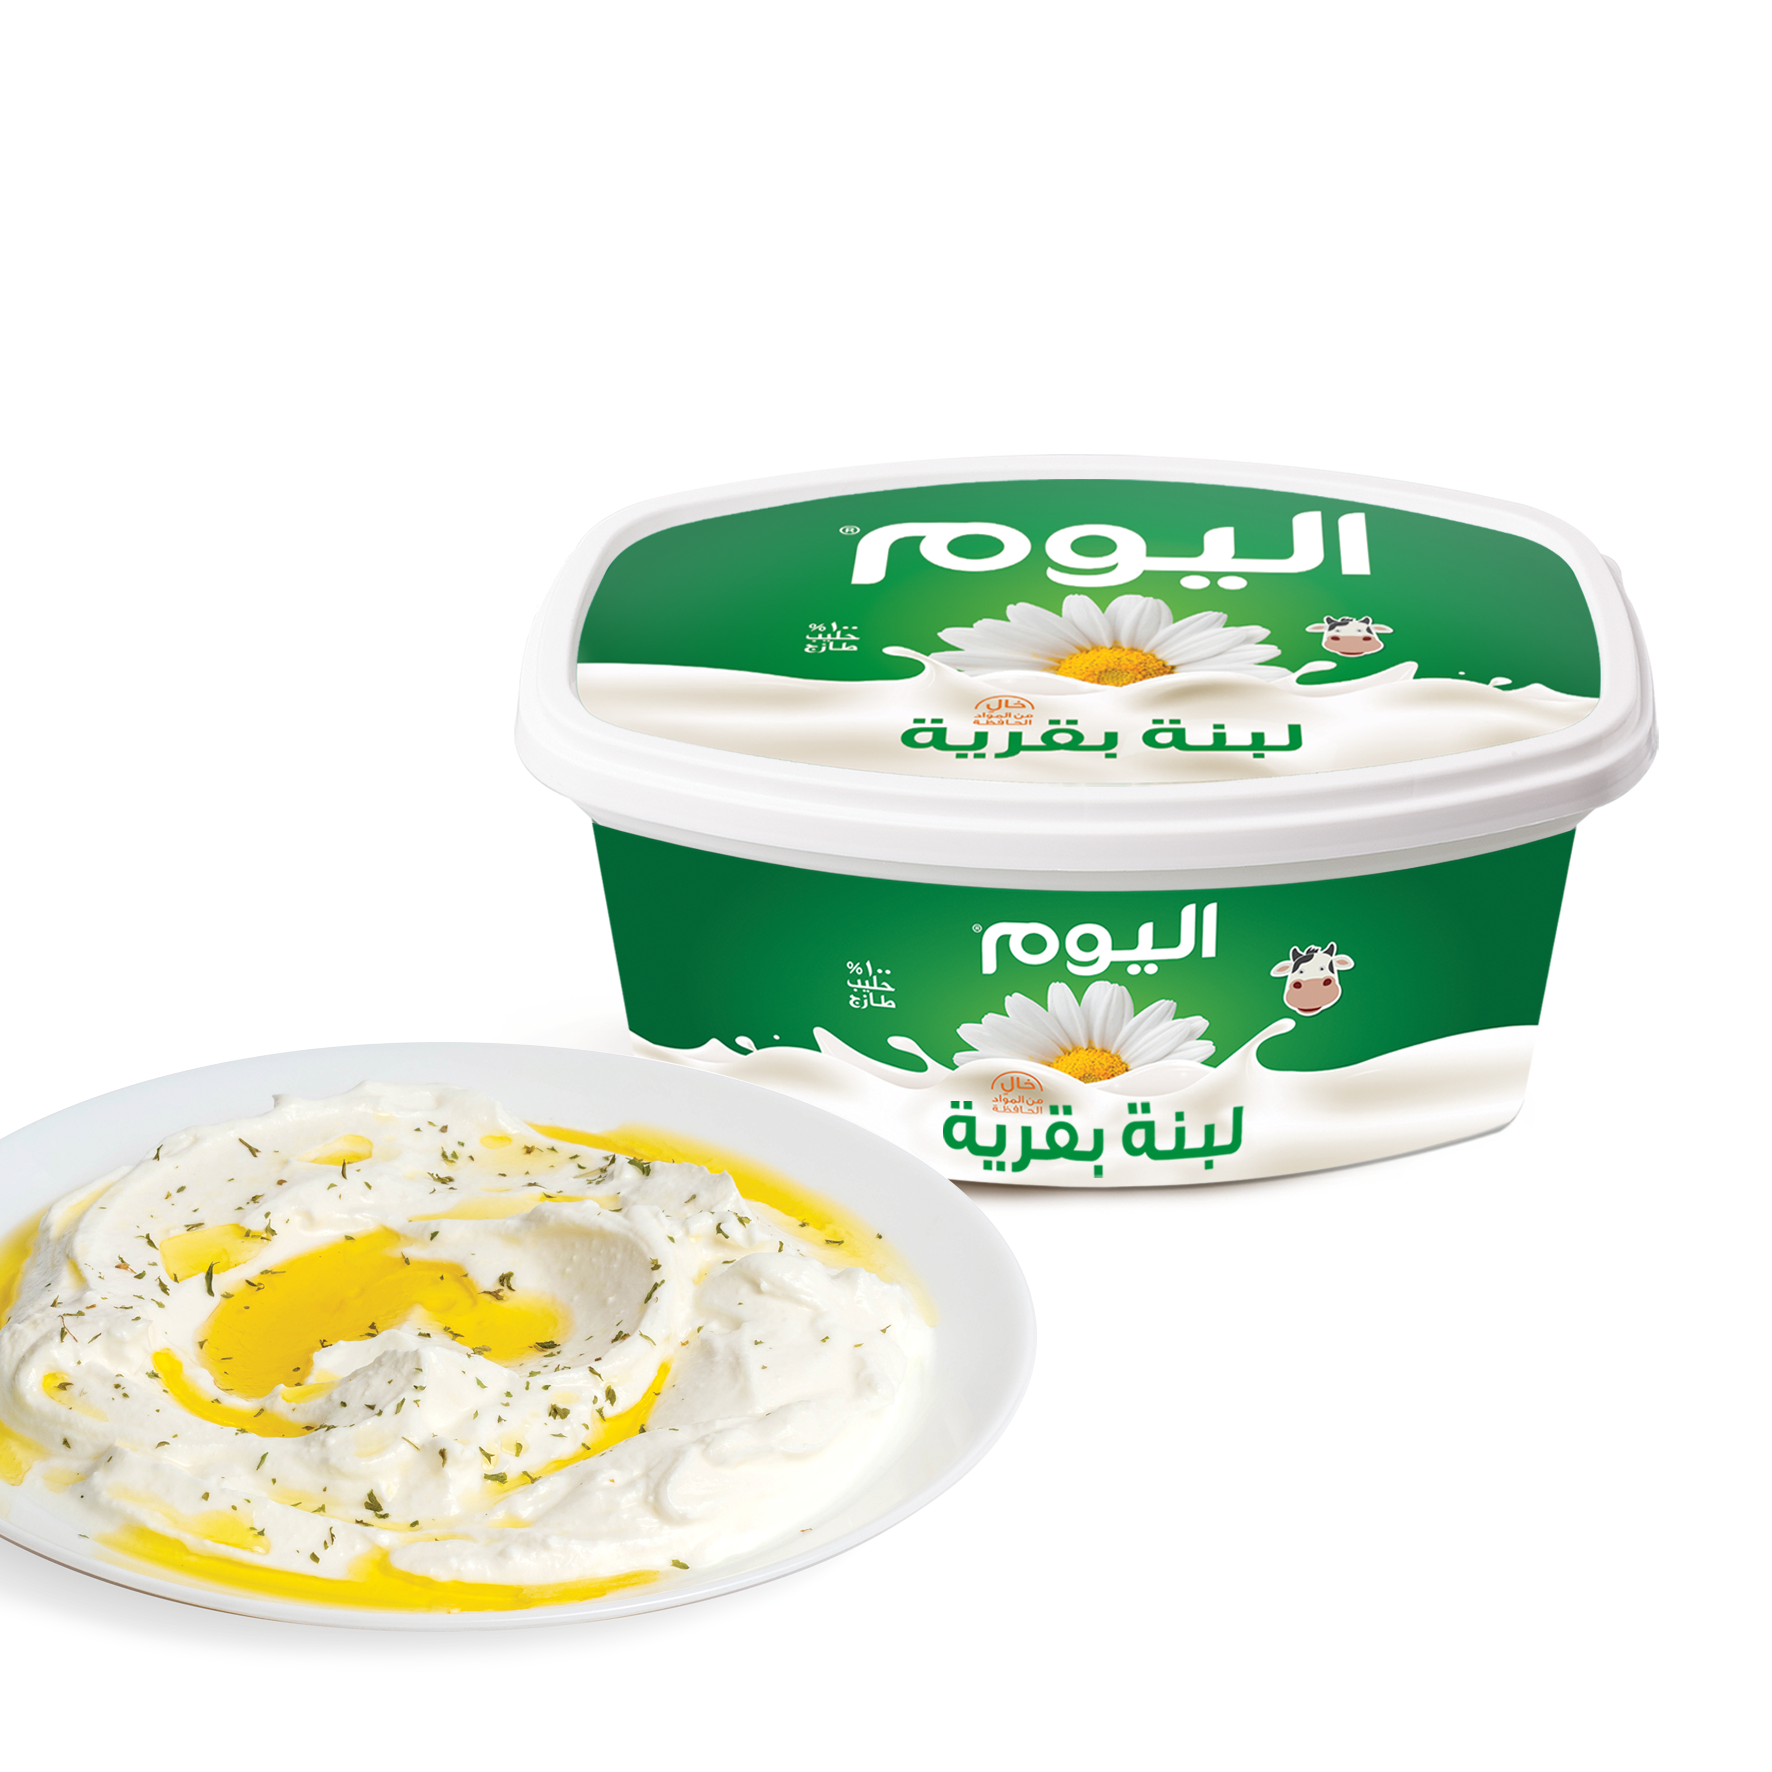 FRESH LABANEH PRODUCT CATEGORY